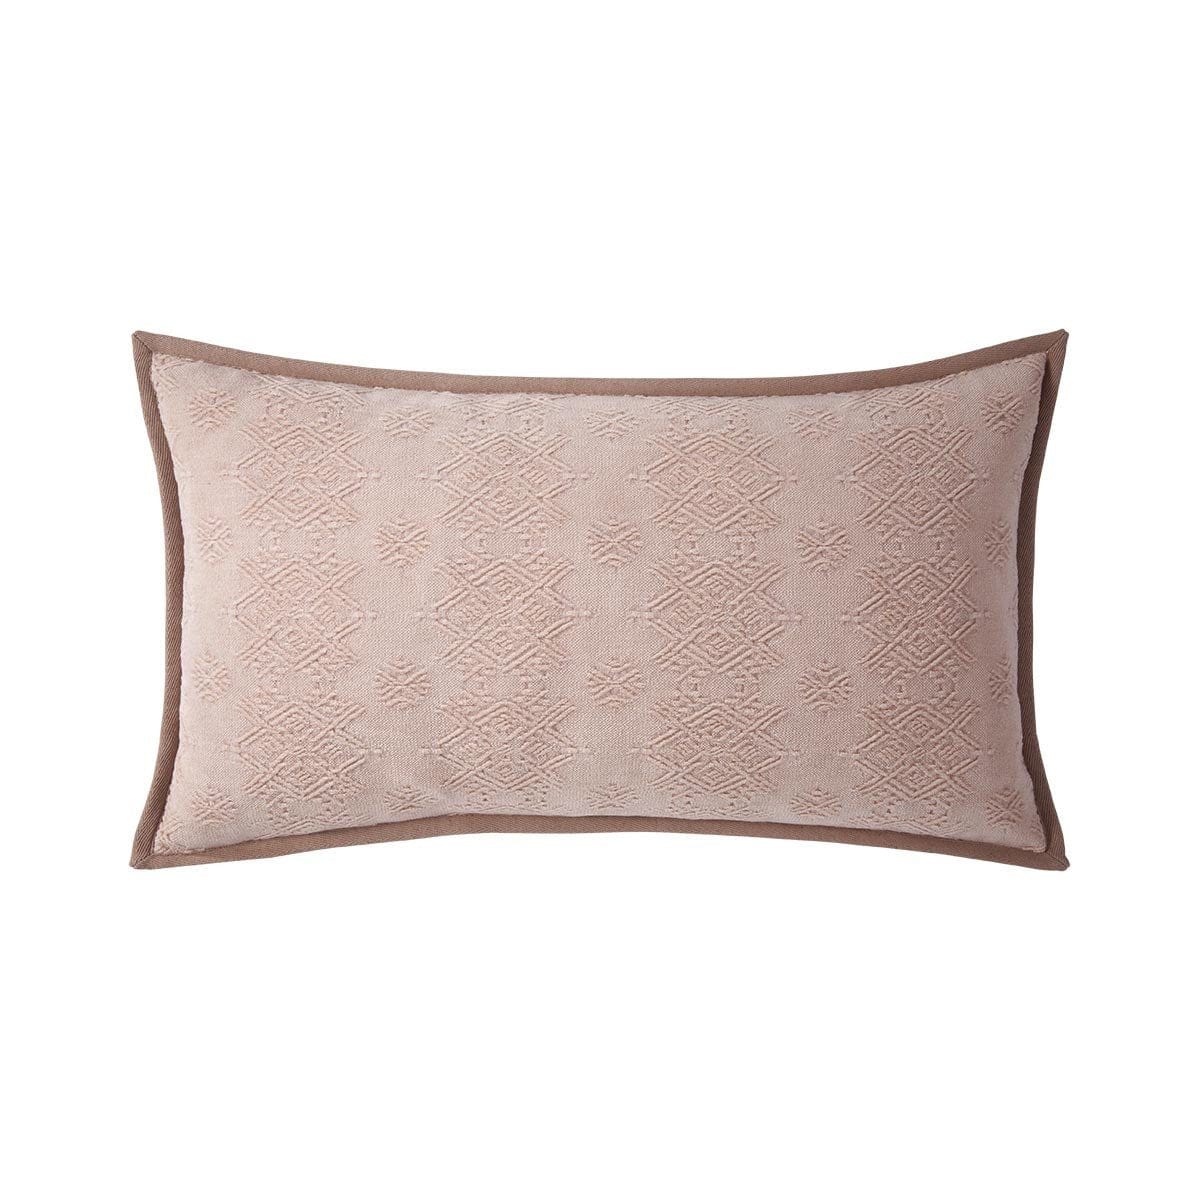 Decorative Pillows Iosis Syracuse Decorative Pillow by Yves Delorme Petale Yves Delorme